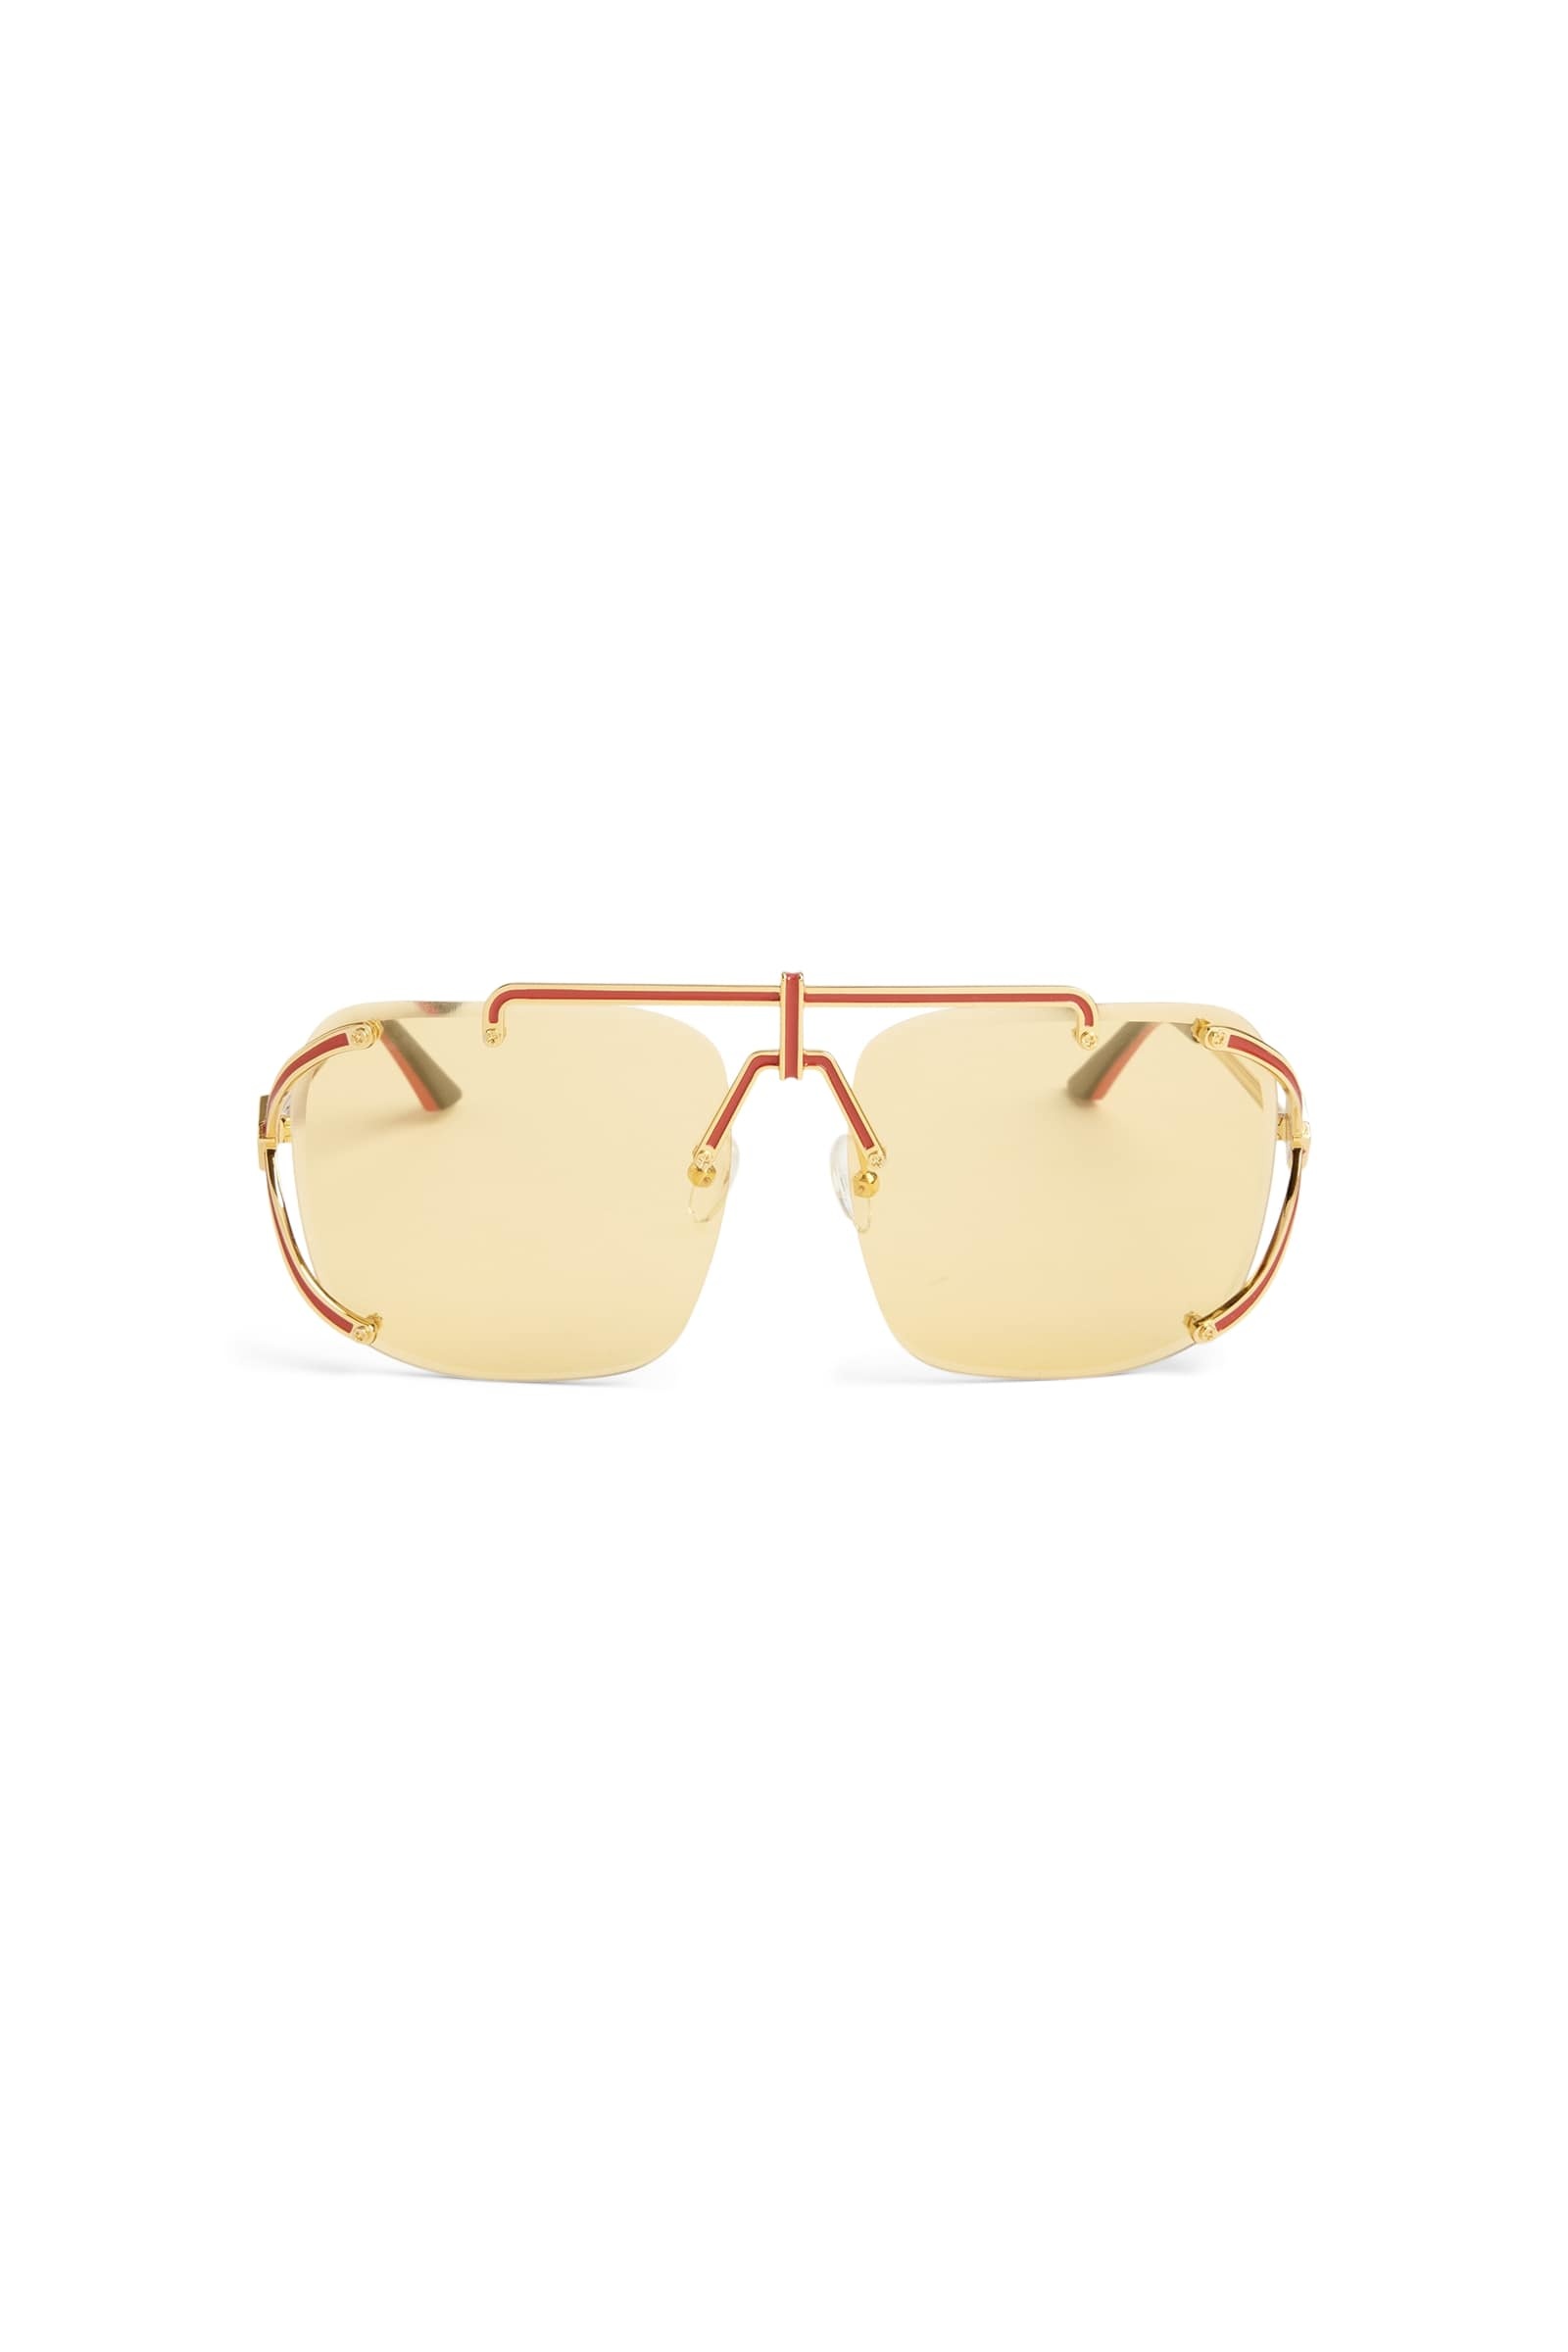 Gold & Red The Pilot Sunglasses - 2